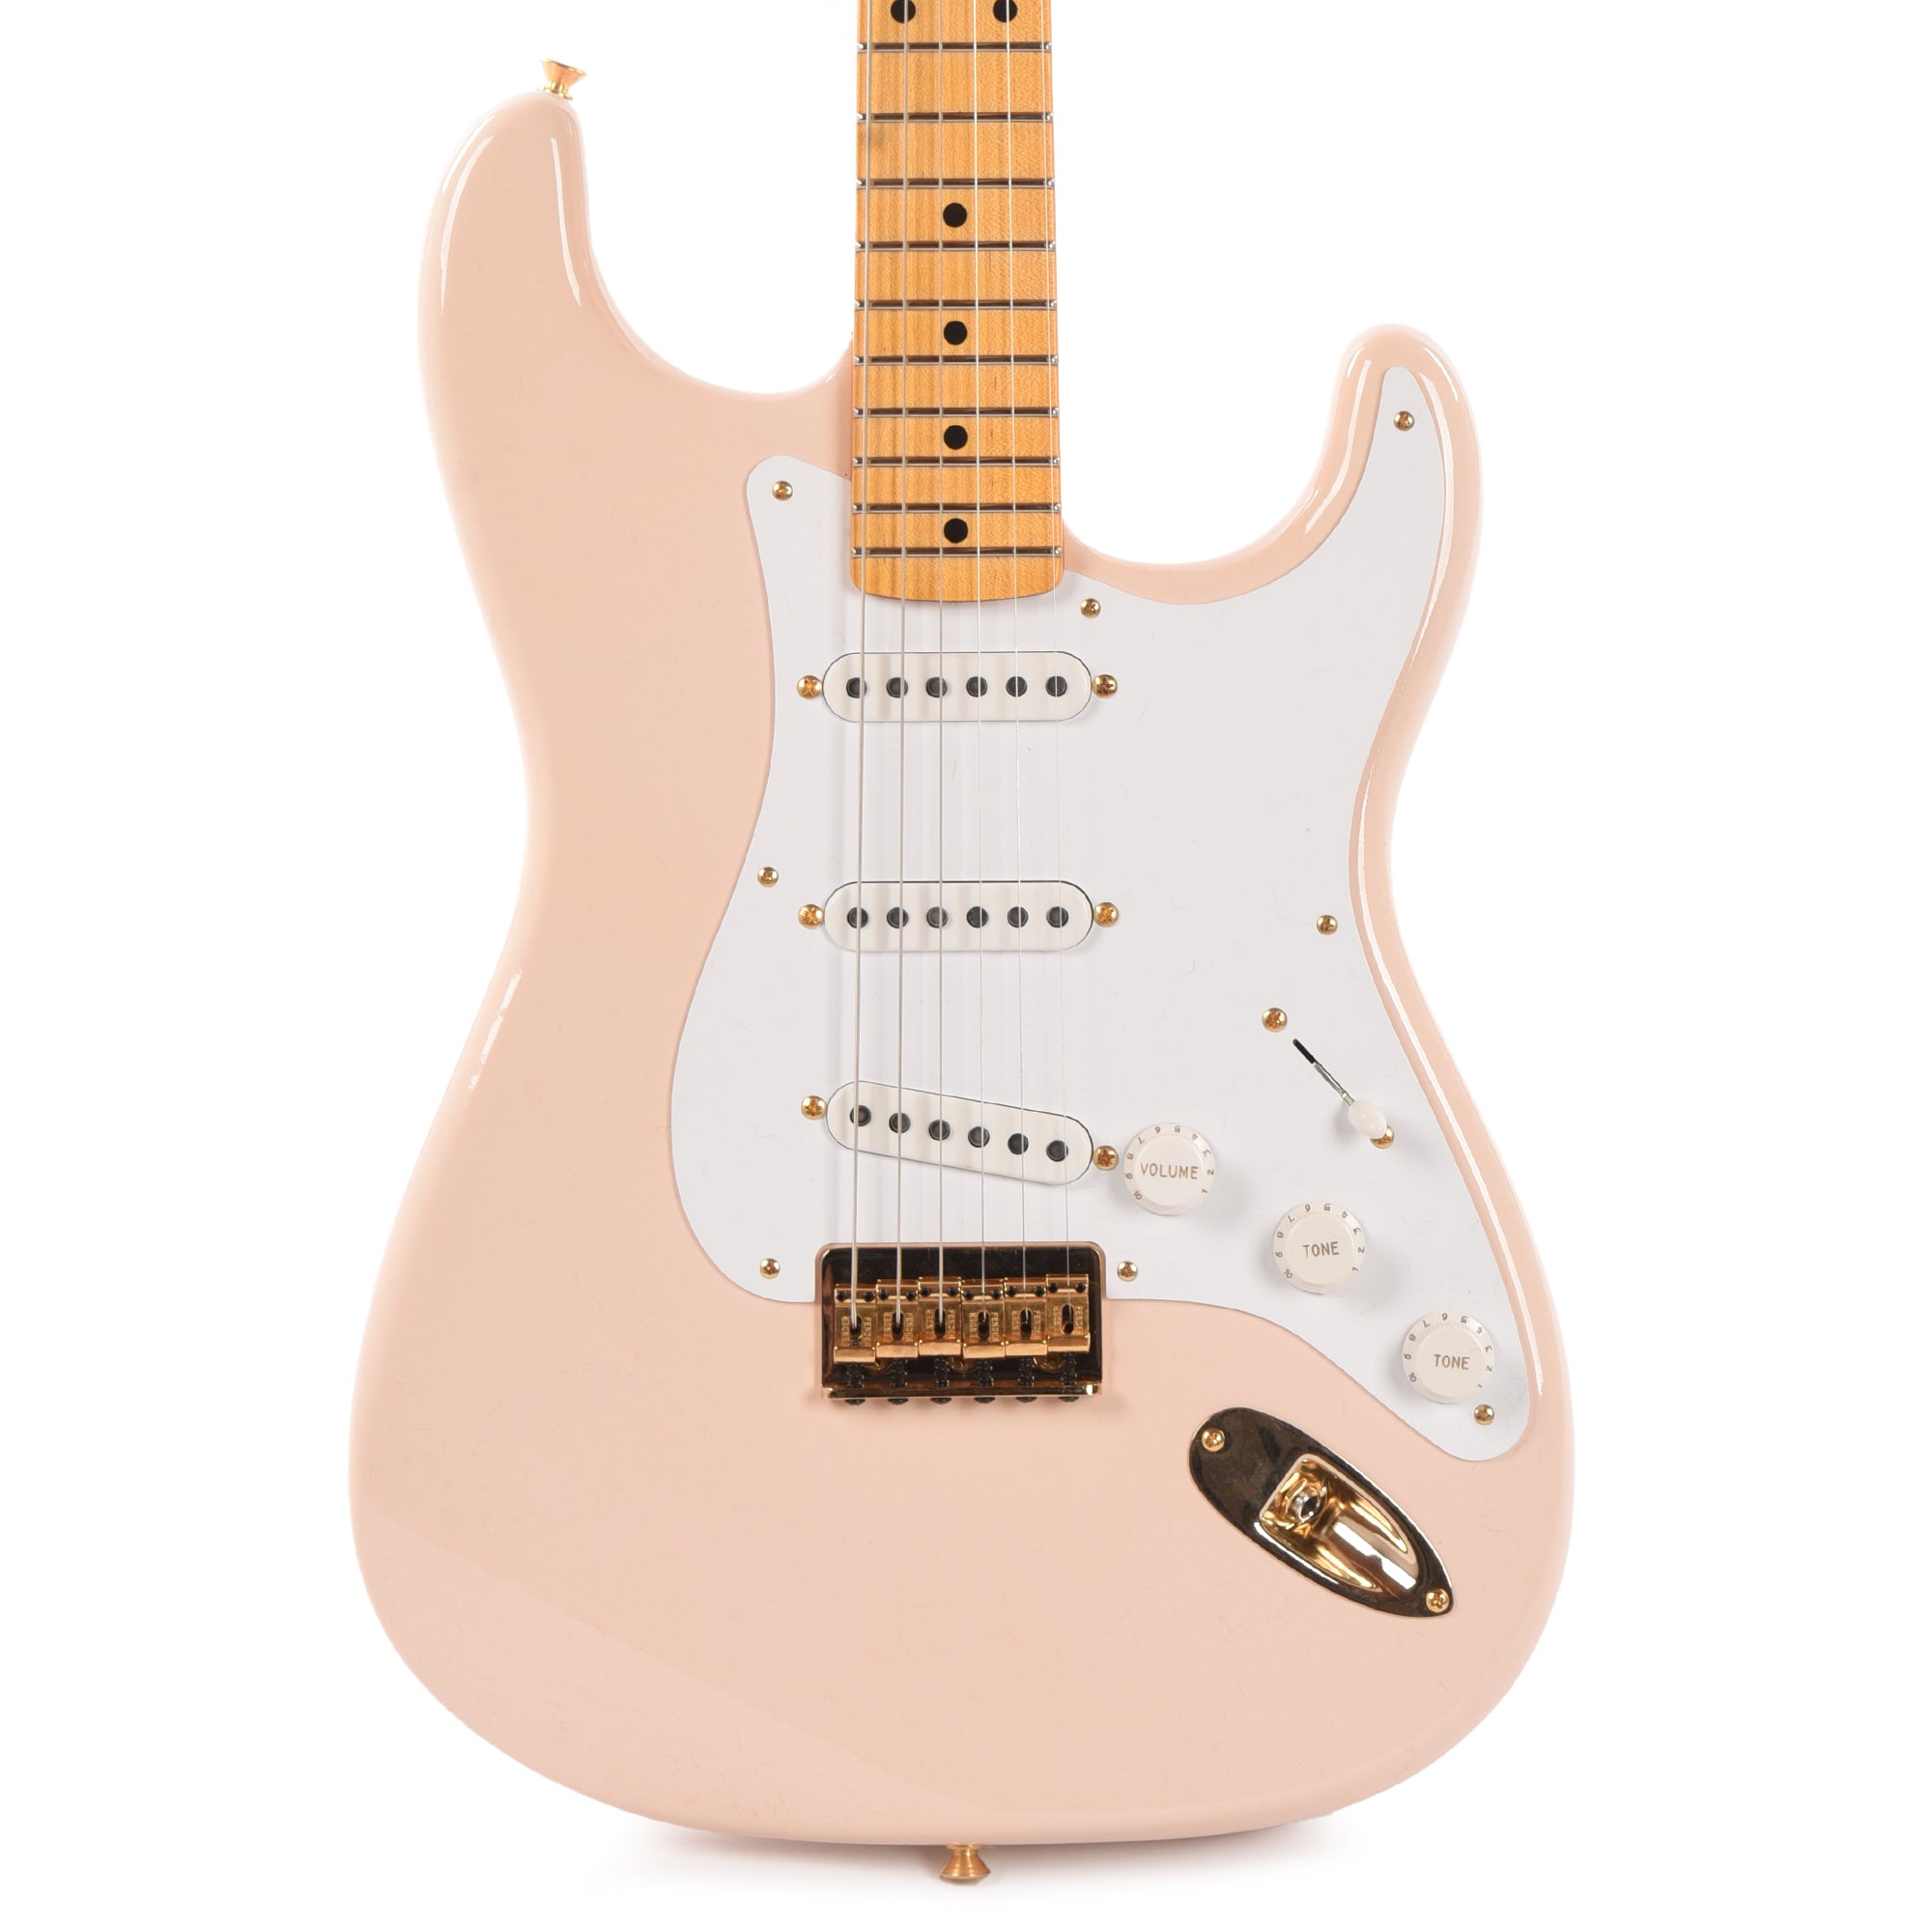 Fender Custom Shop Limited Edition '54 Hardtail Stratocaster Deluxe Closet Classic with Gold Hardware Super/Super Faded Aged Shell Pink